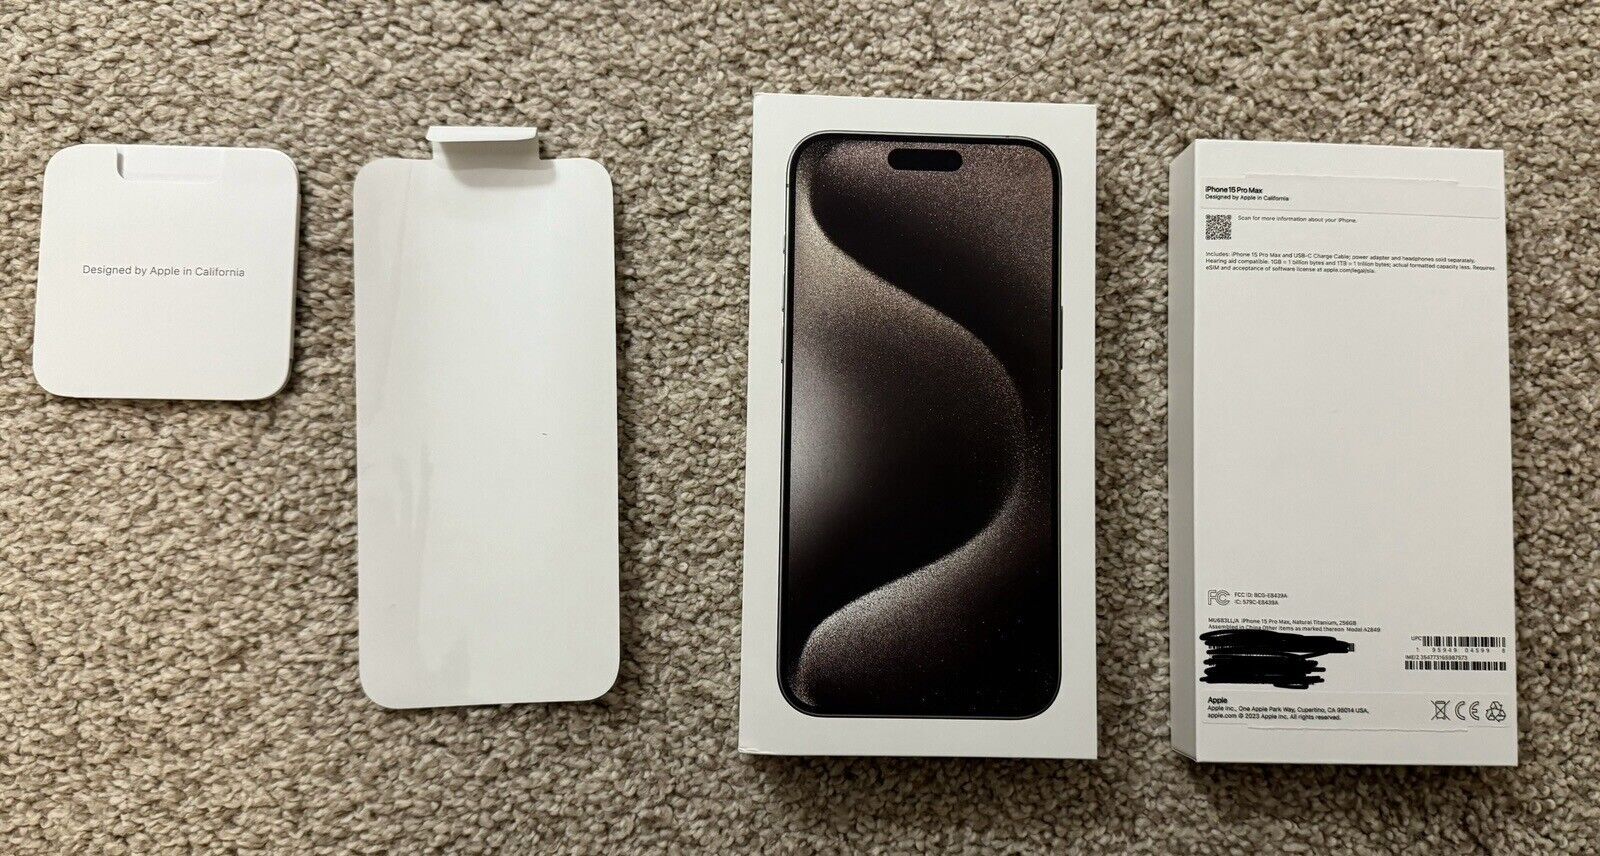 By next summer, Apple will be able to install iOS updates on iPhone devices in never-opened boxes - This summer, US Apple Stores will install iOS updates on iPhone devices in never-opened boxes